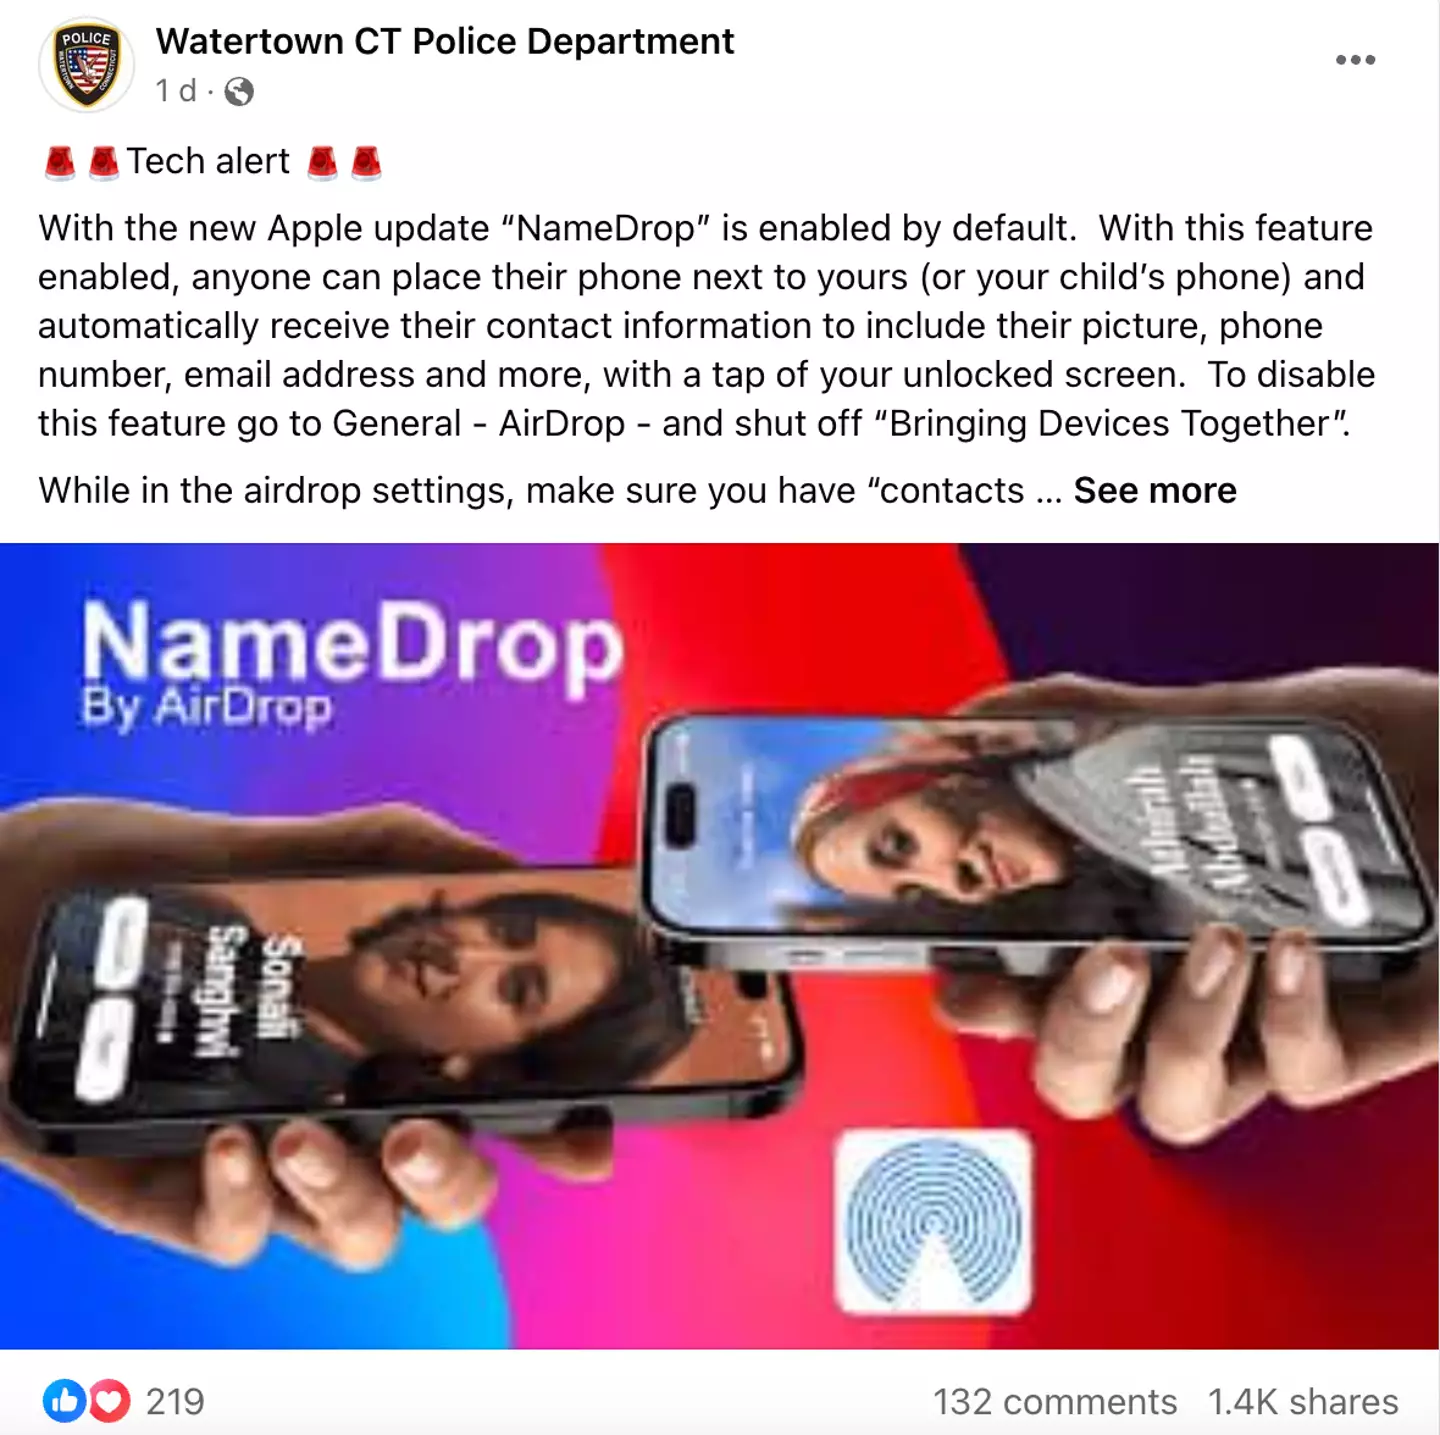 Watertown CT Police Department spoke out about the feature in a post to Facebook.